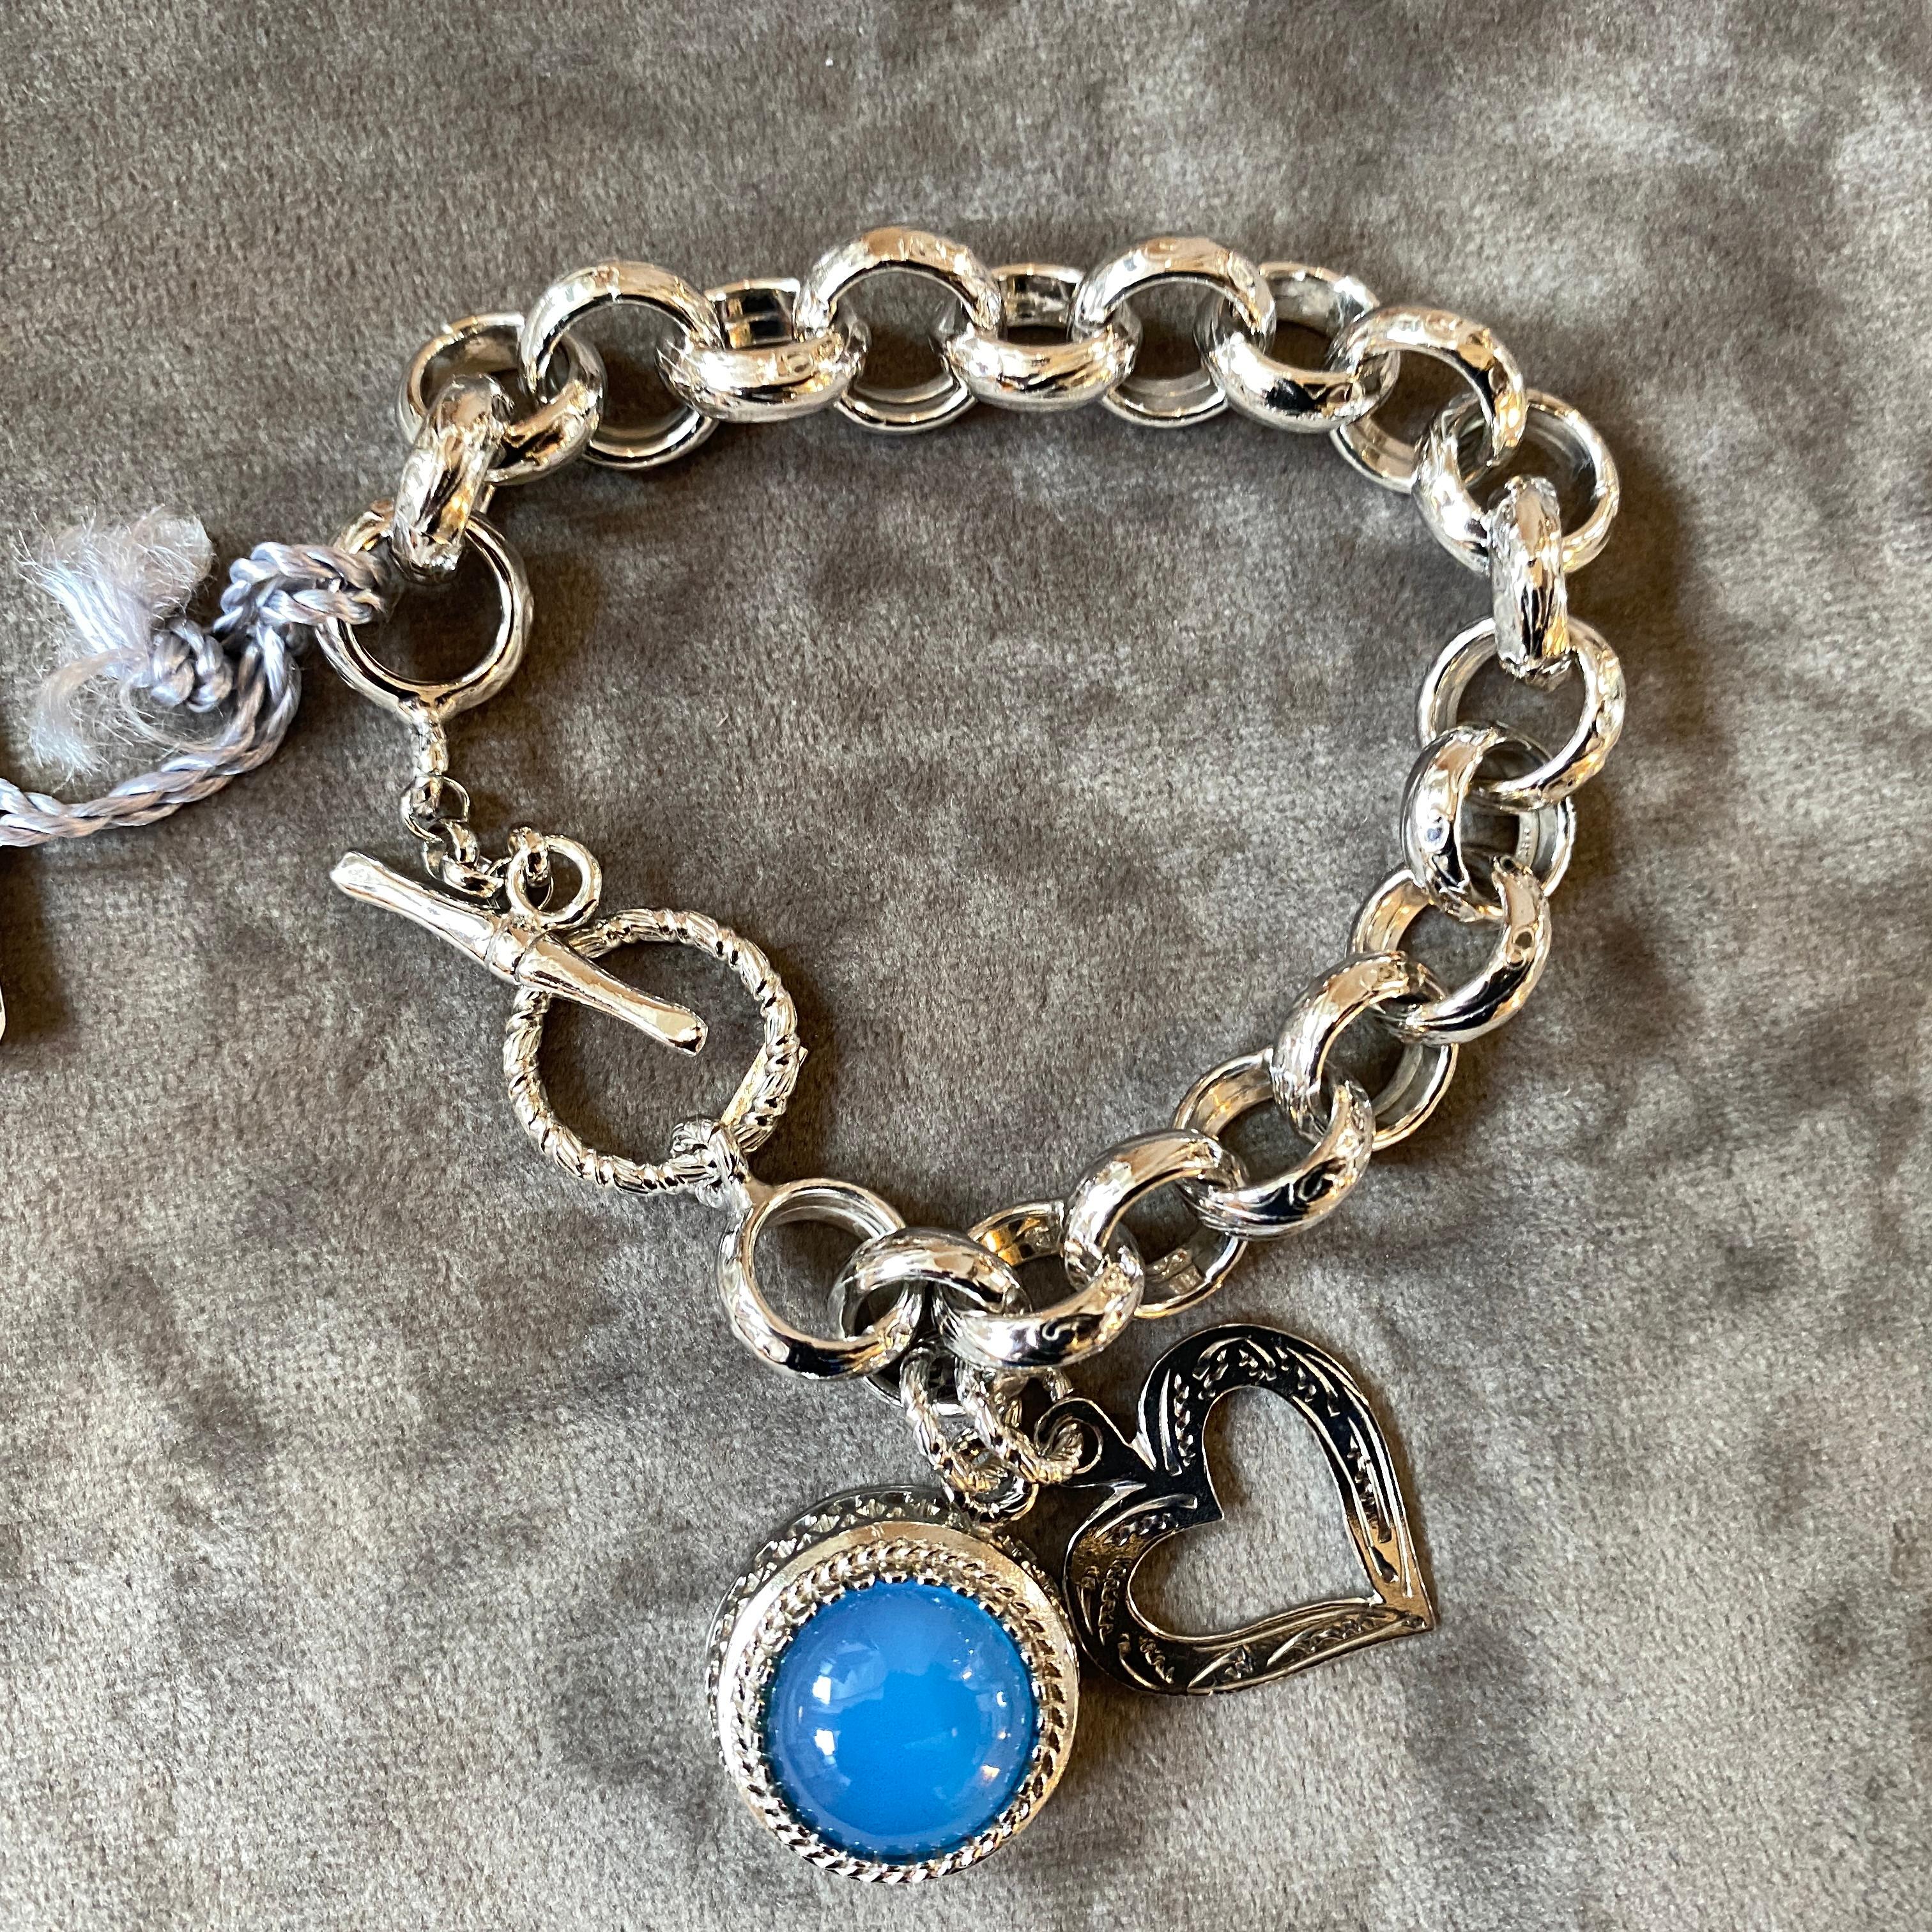 A sterling silver bracelet made in Italy in the Nineties hand-worked as a jewel. Blue Cabochon agate  and a sterling silver heart pendant in an hand-crafted chain. The 1990s Vintage Sterling Silver and Blue Agate Pendant Italian Bracelet by Anomis